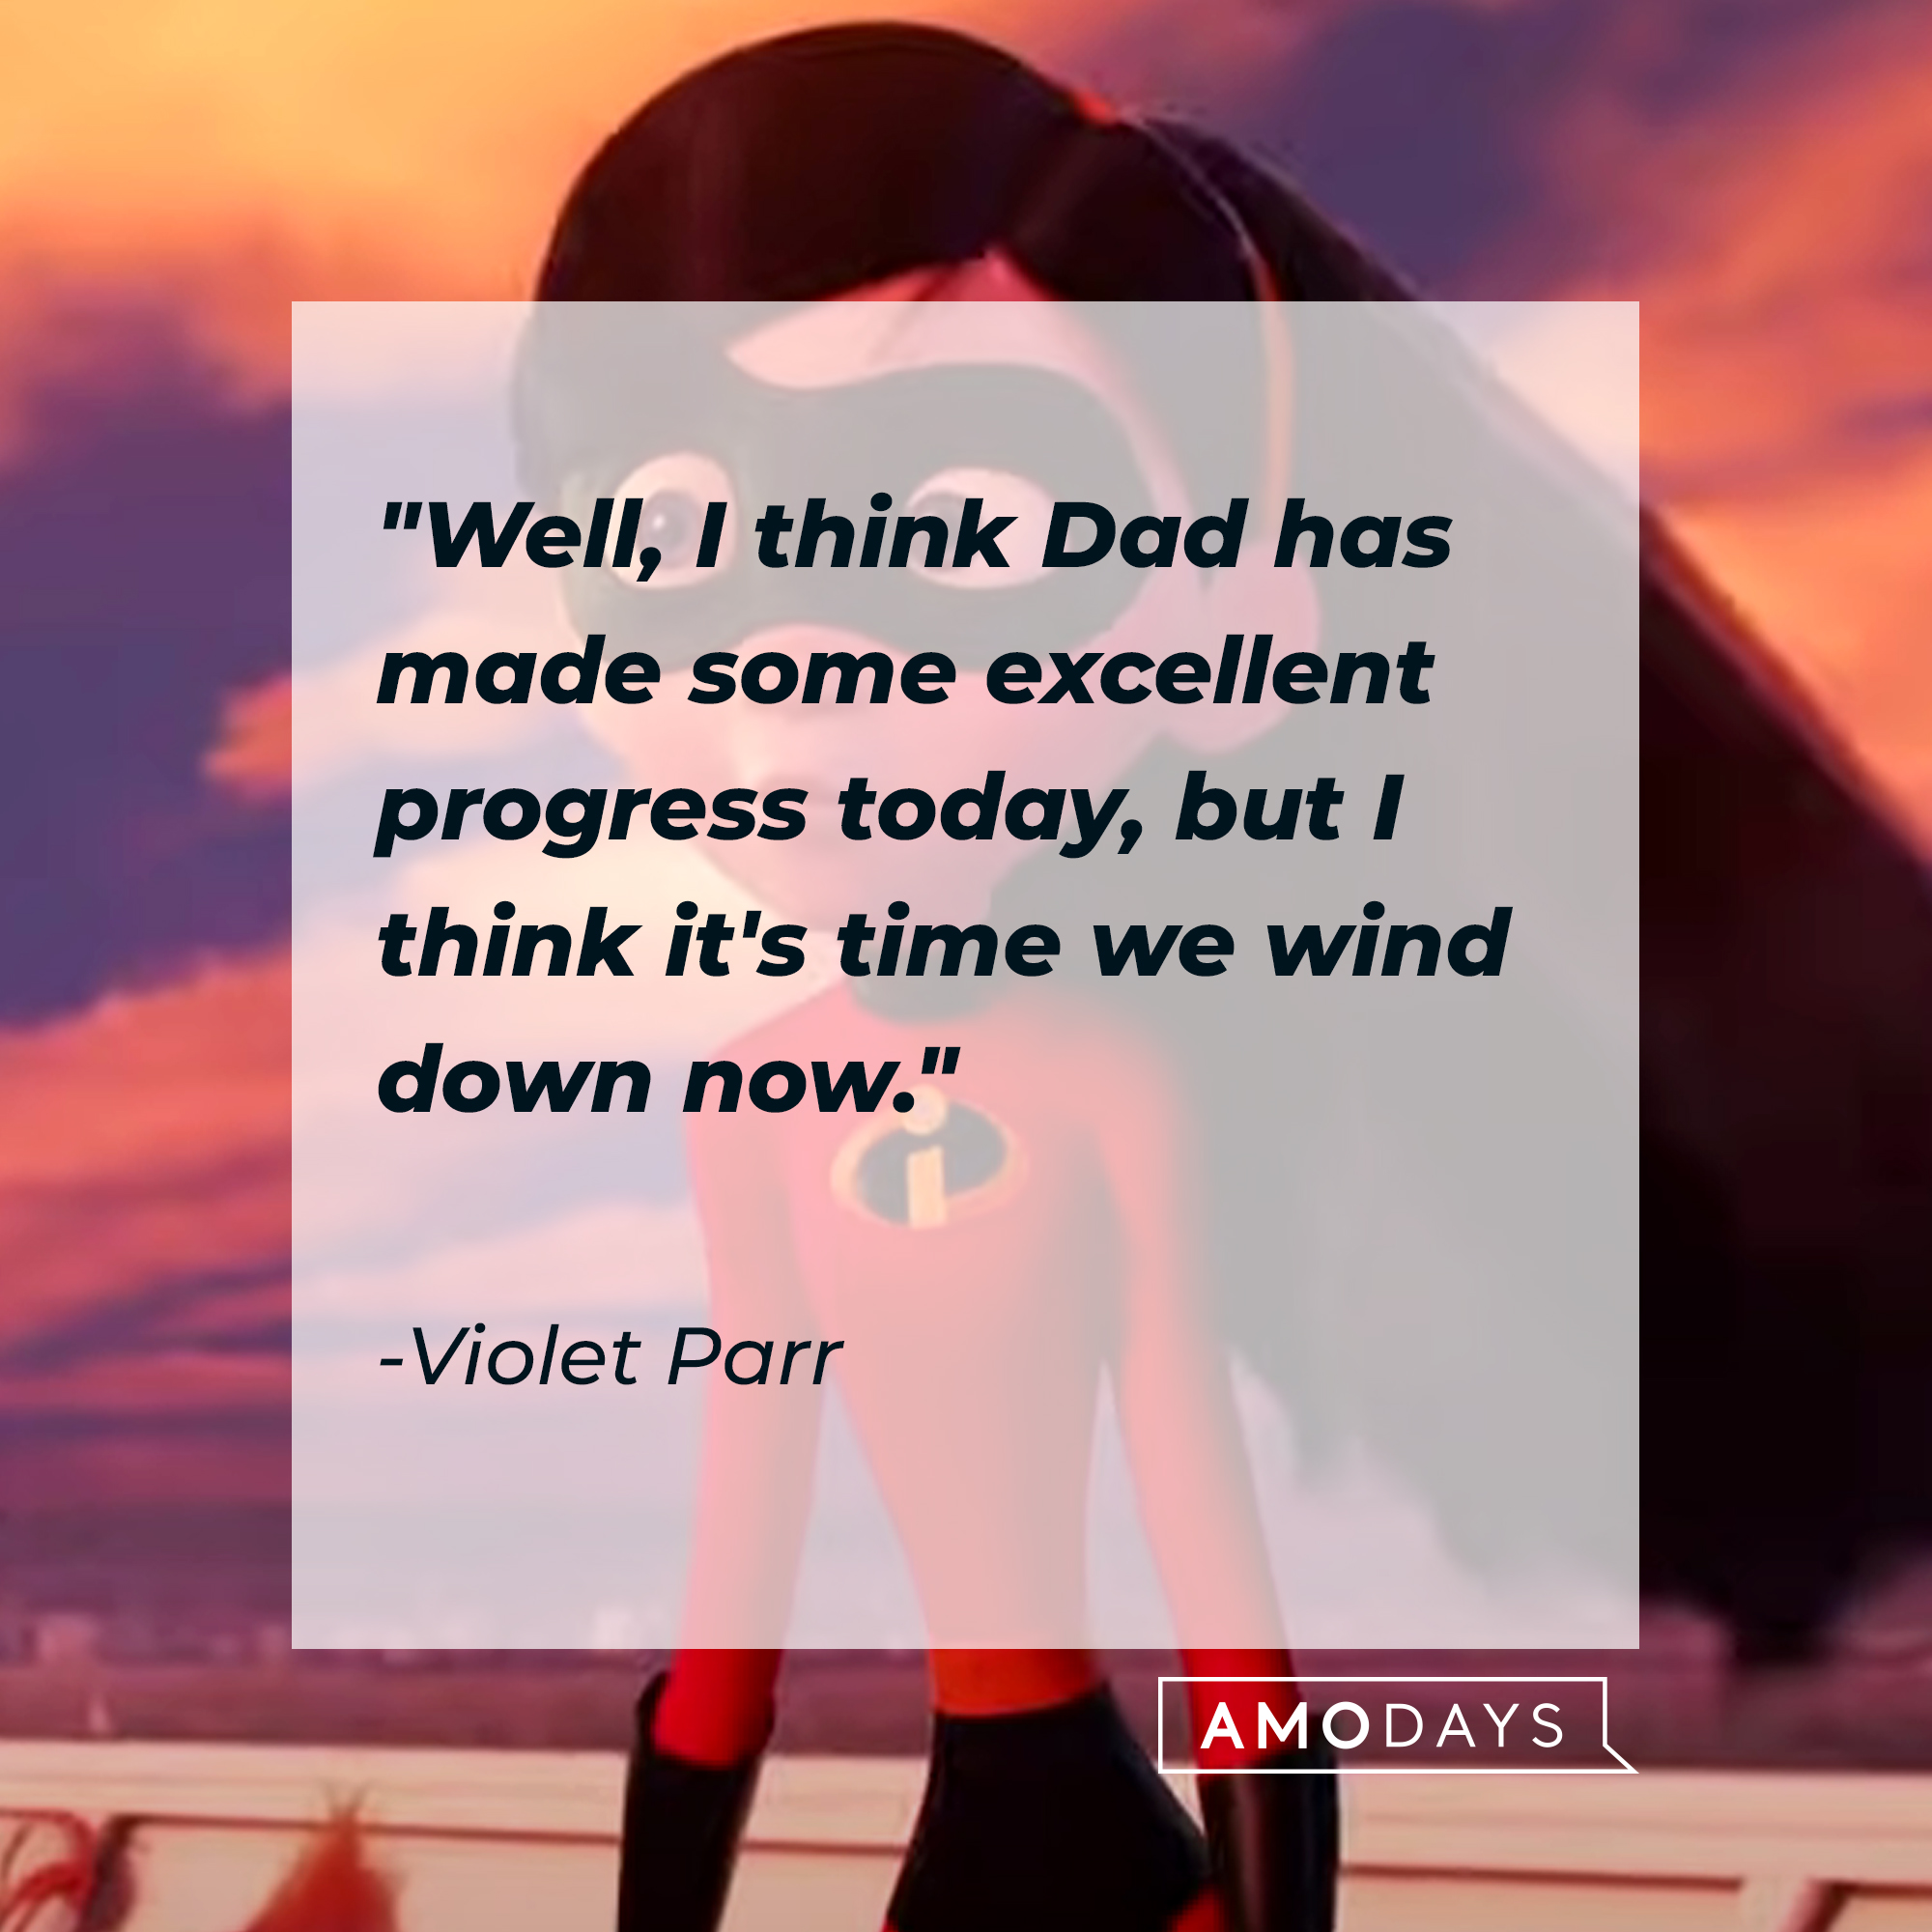 Violet Parr with her quote: "Well, I think Dad has made some excellent progress today, but I think it's time we wind down now." | Source: Youtube/pixar